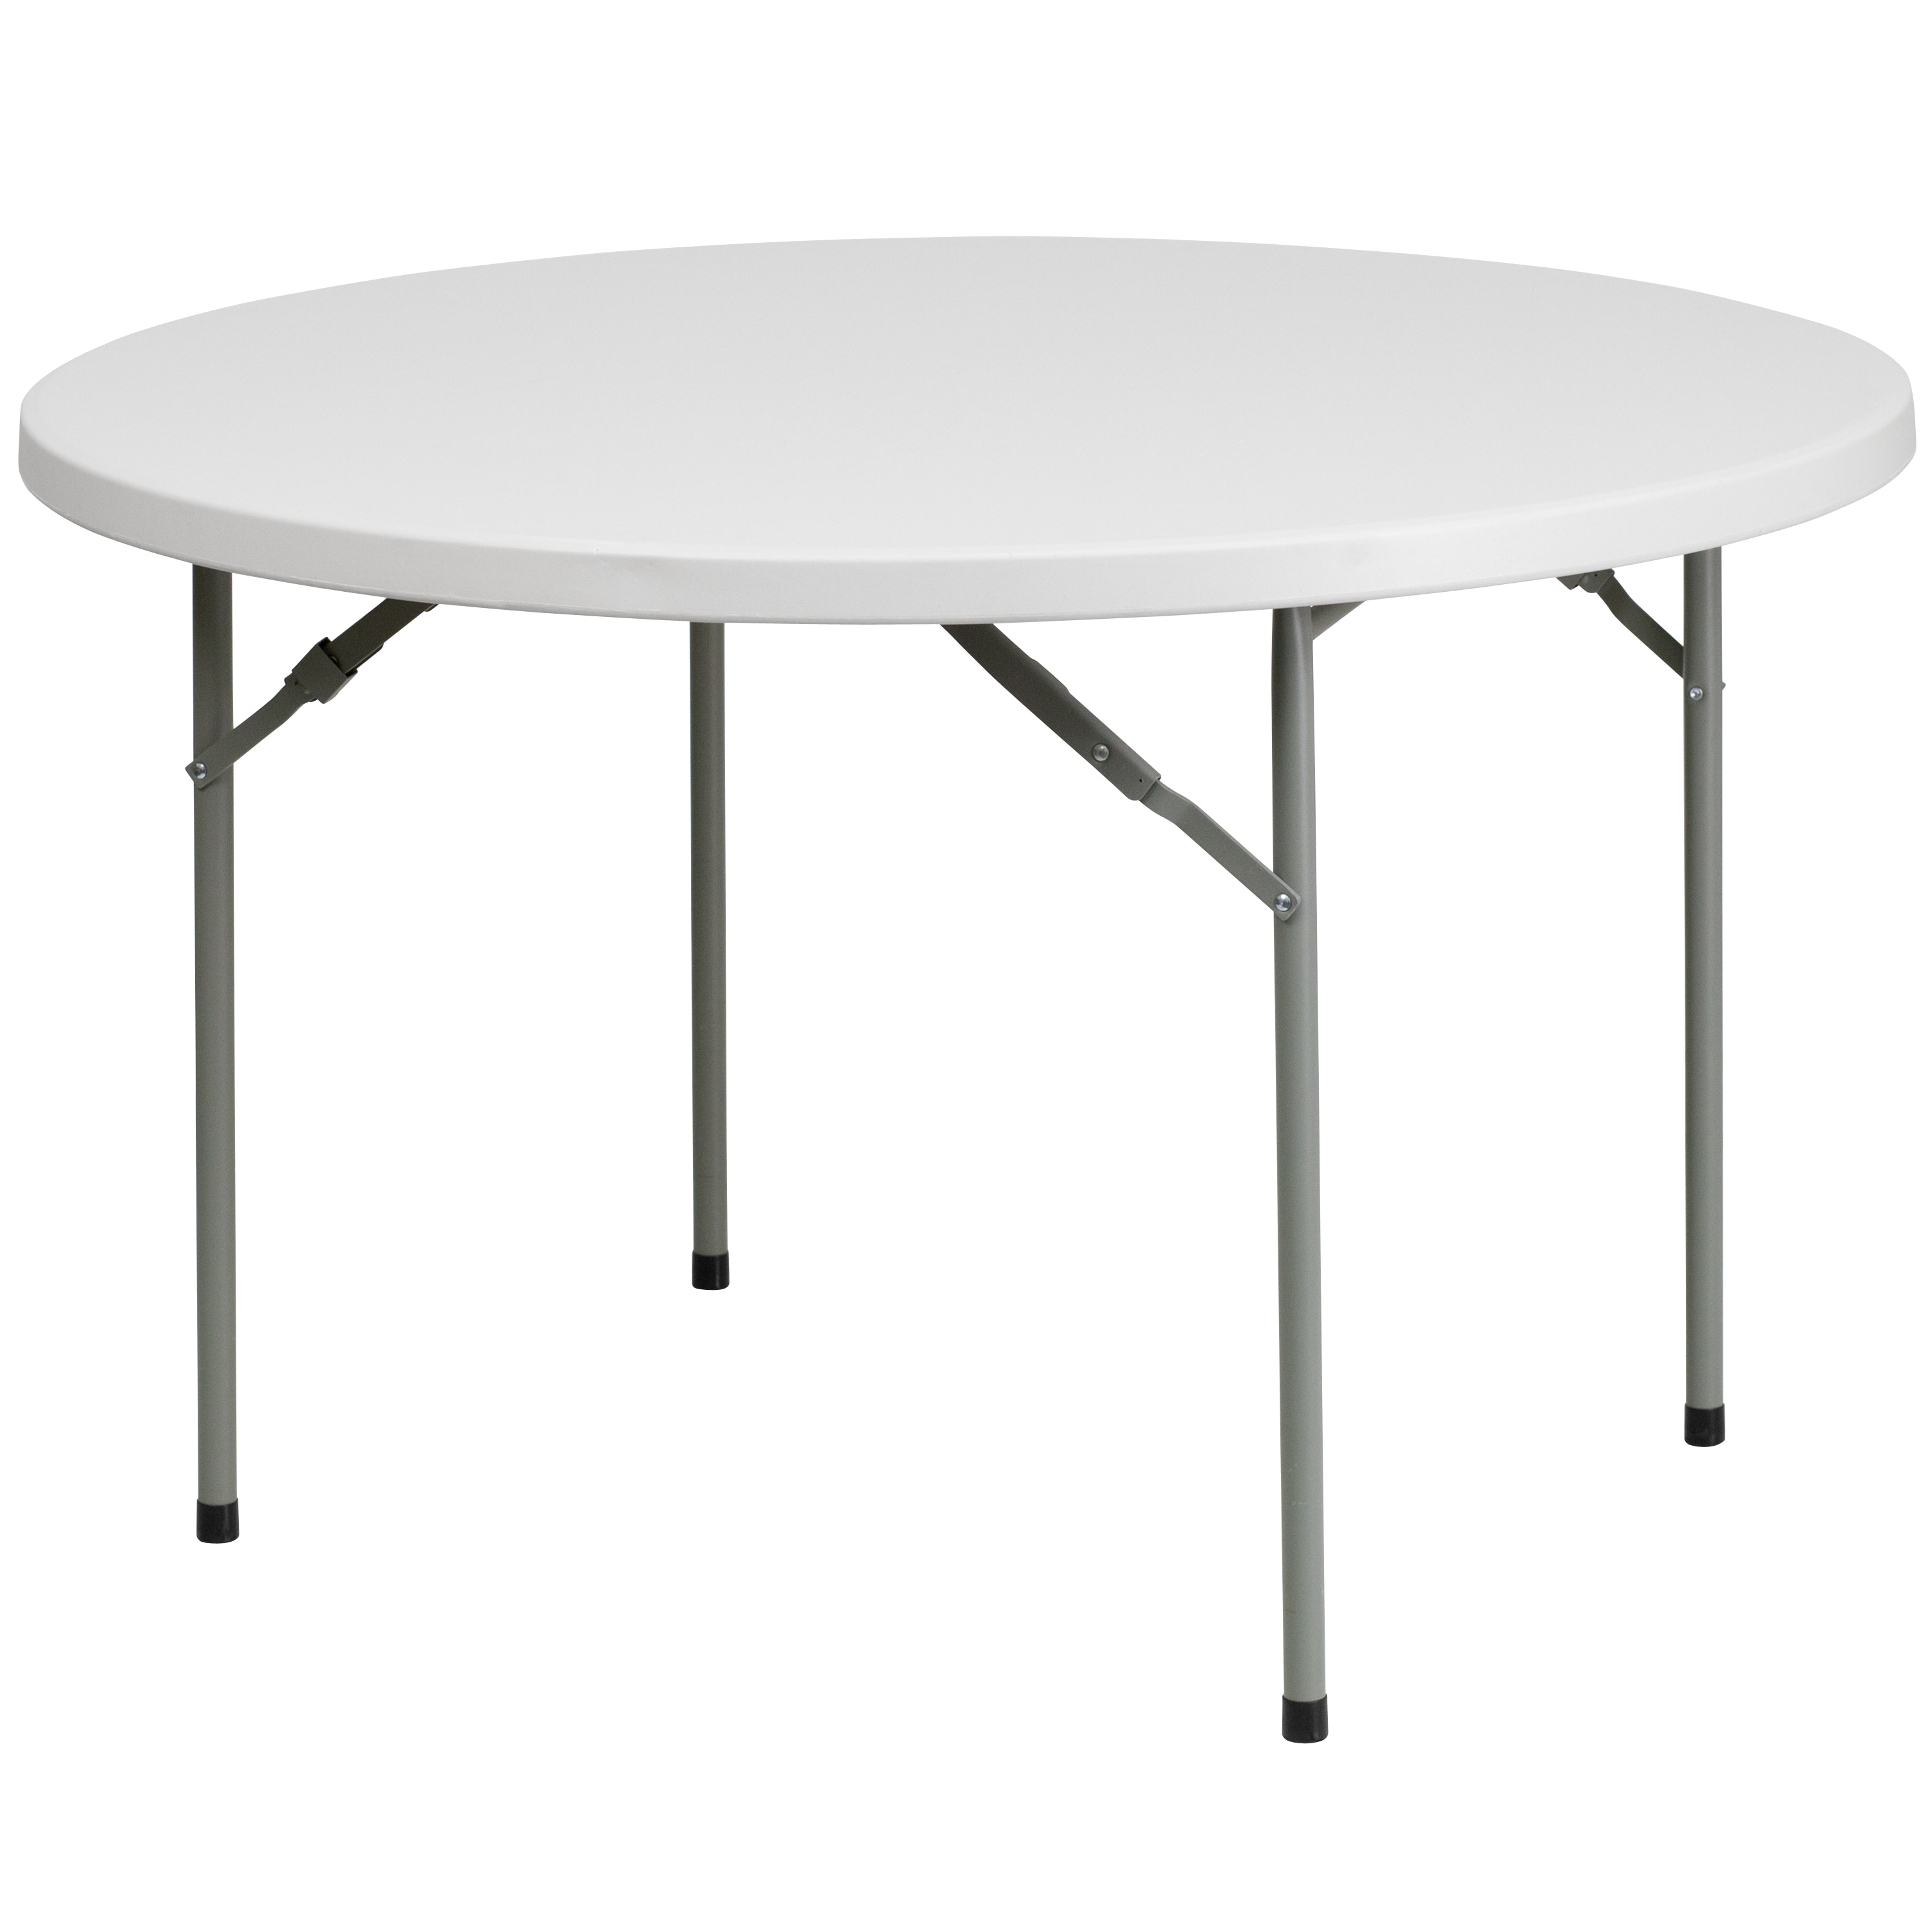 White Folding Banquet Table, 48 Inch Round Folding Table Sam S Club